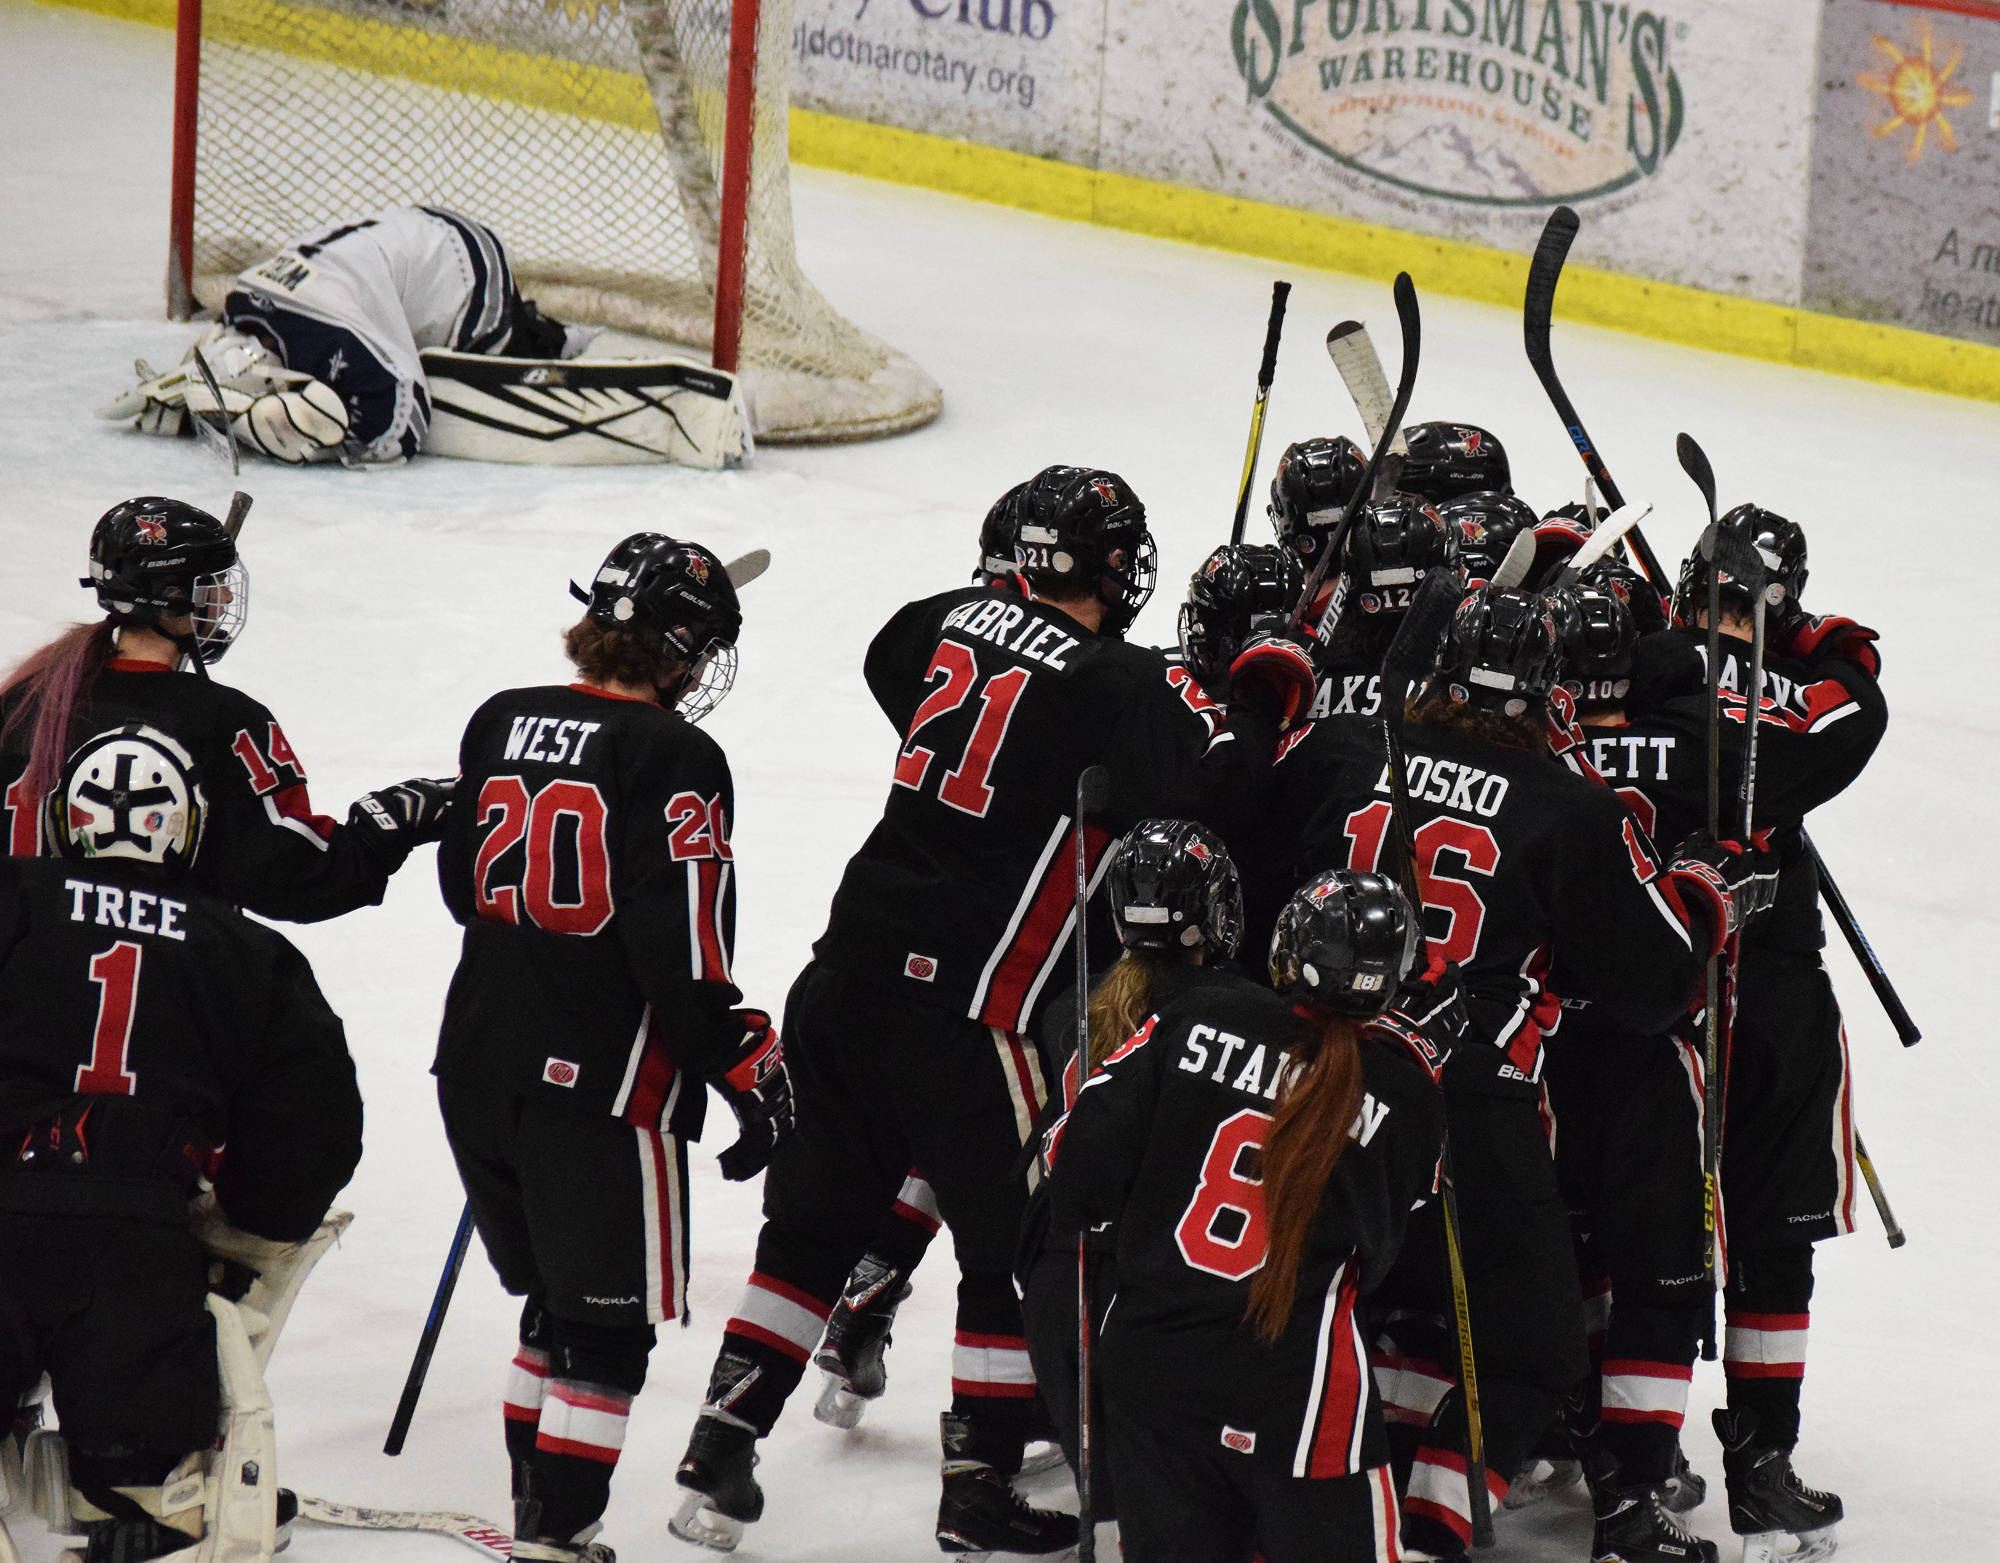 The Kenai Central hockey team celebrates Levi Mese’s overtime goal that gave the Kardinals a 6-5 win over Soldotna on Saturday night at the Soldotna Regional Sports Complex. (Photo by Joey Klecka/Peninsula Clarion)